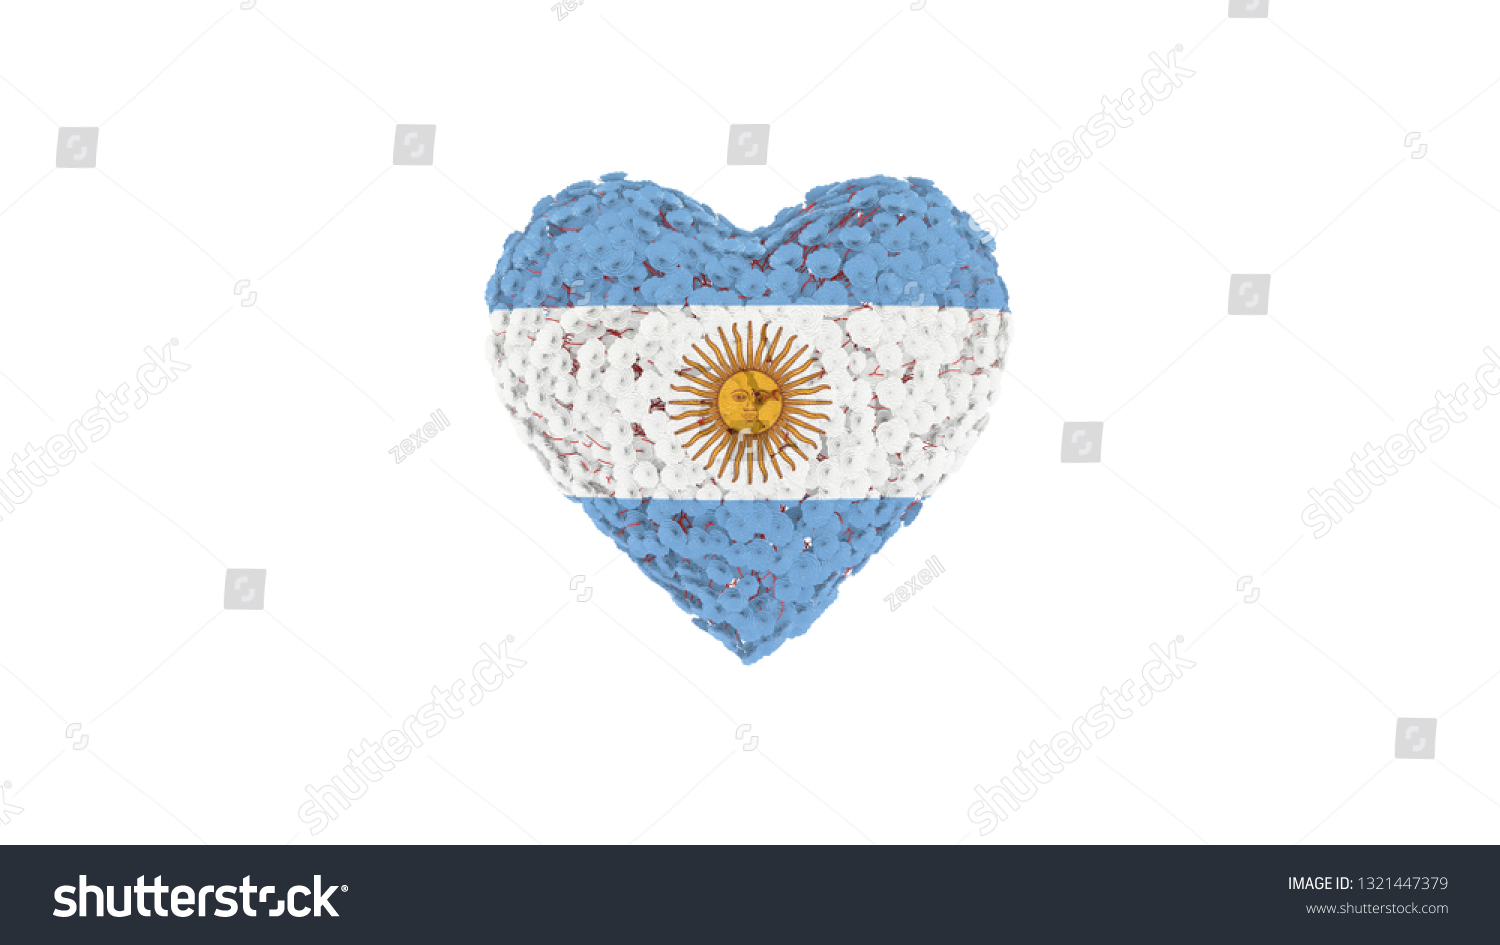 Argentina National Day May 25 Flowers Stock Illustration 1321447379